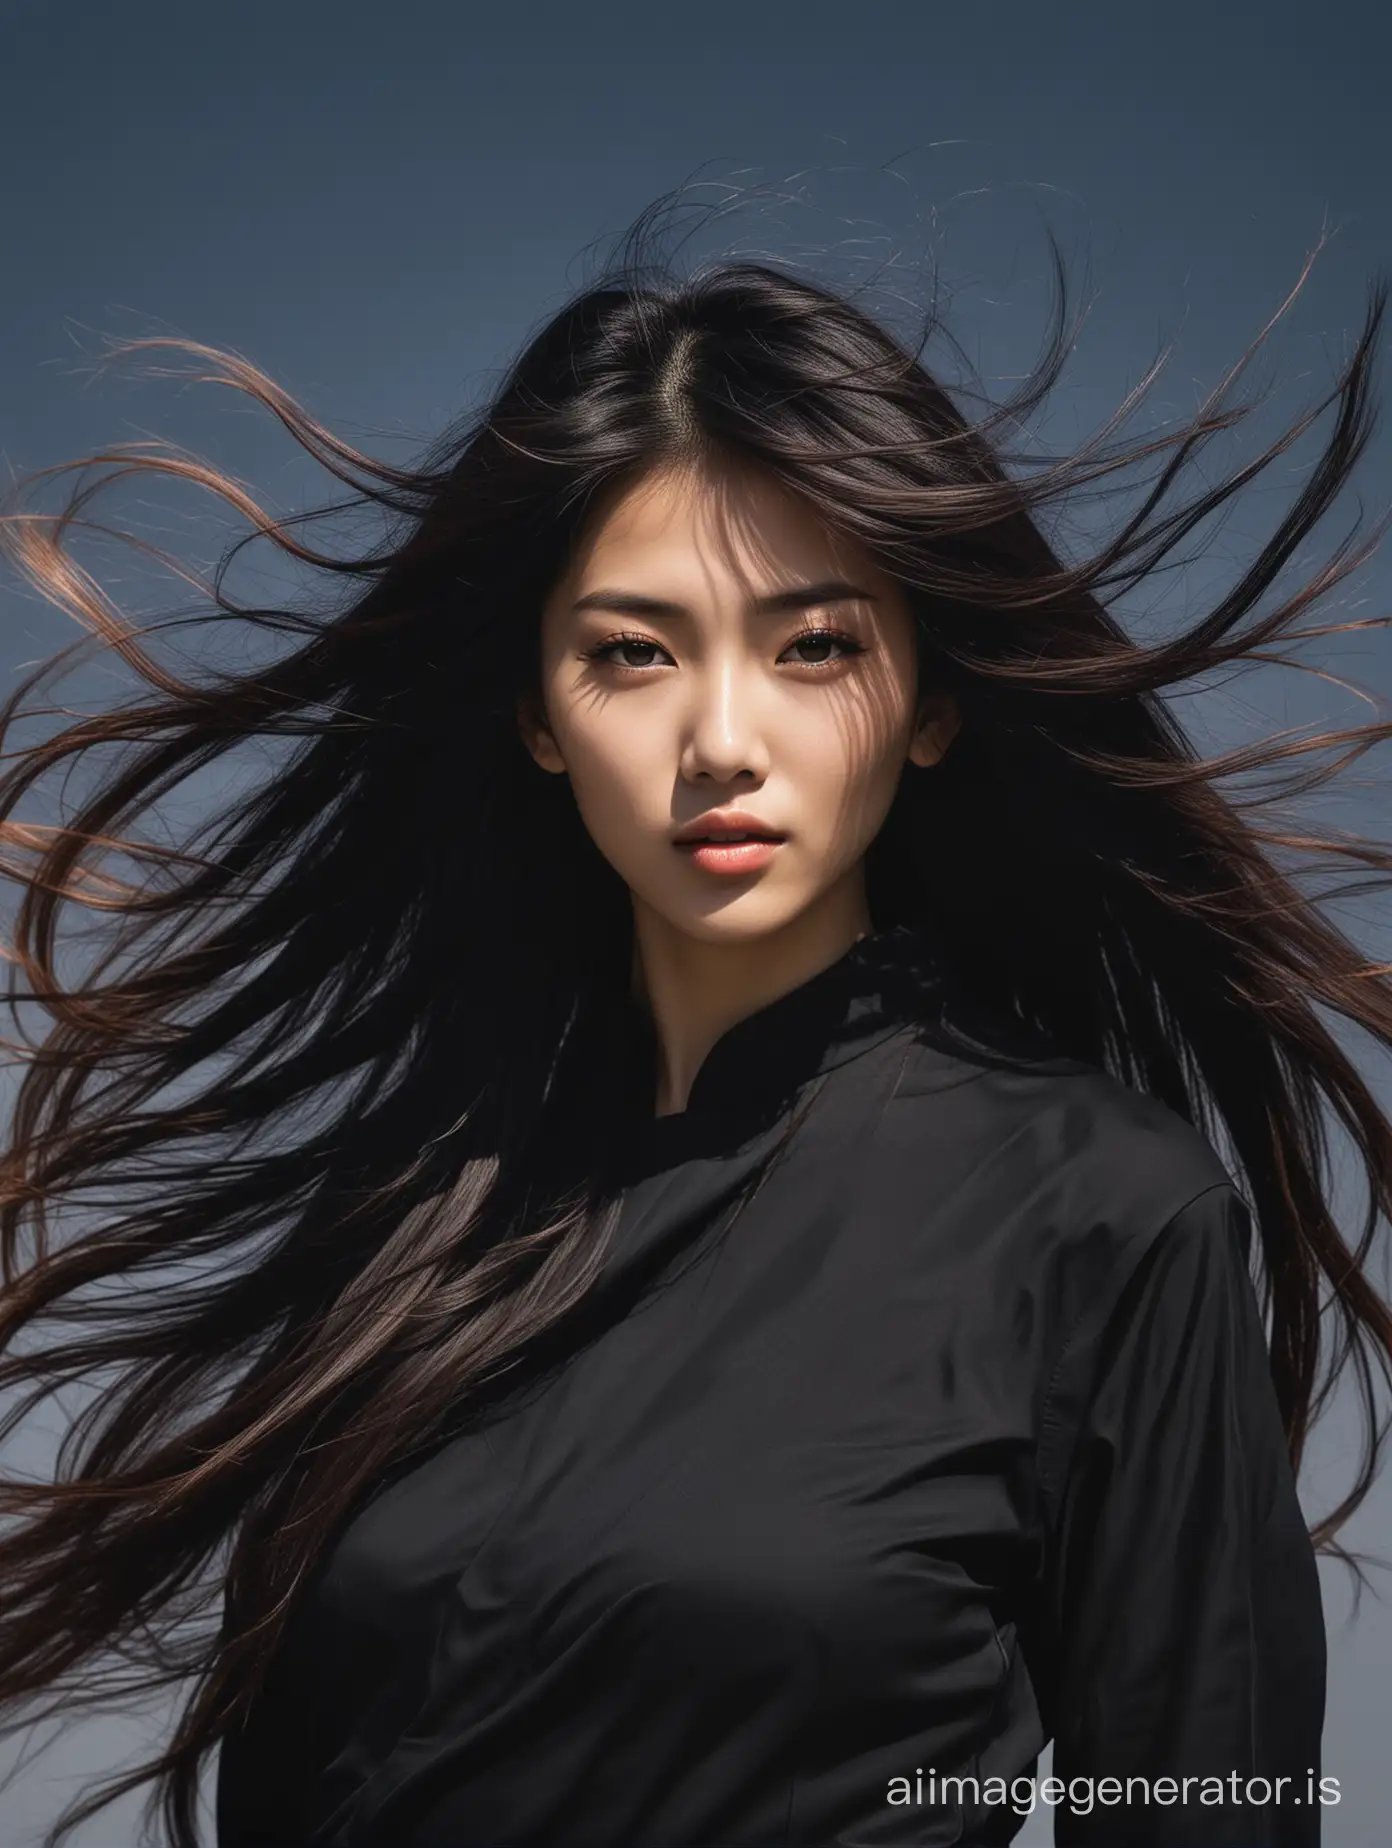 Exquisite-Oriental-Woman-in-HighContrast-Black-Attire-Portrait-of-Beauty-with-WindBlown-Hair